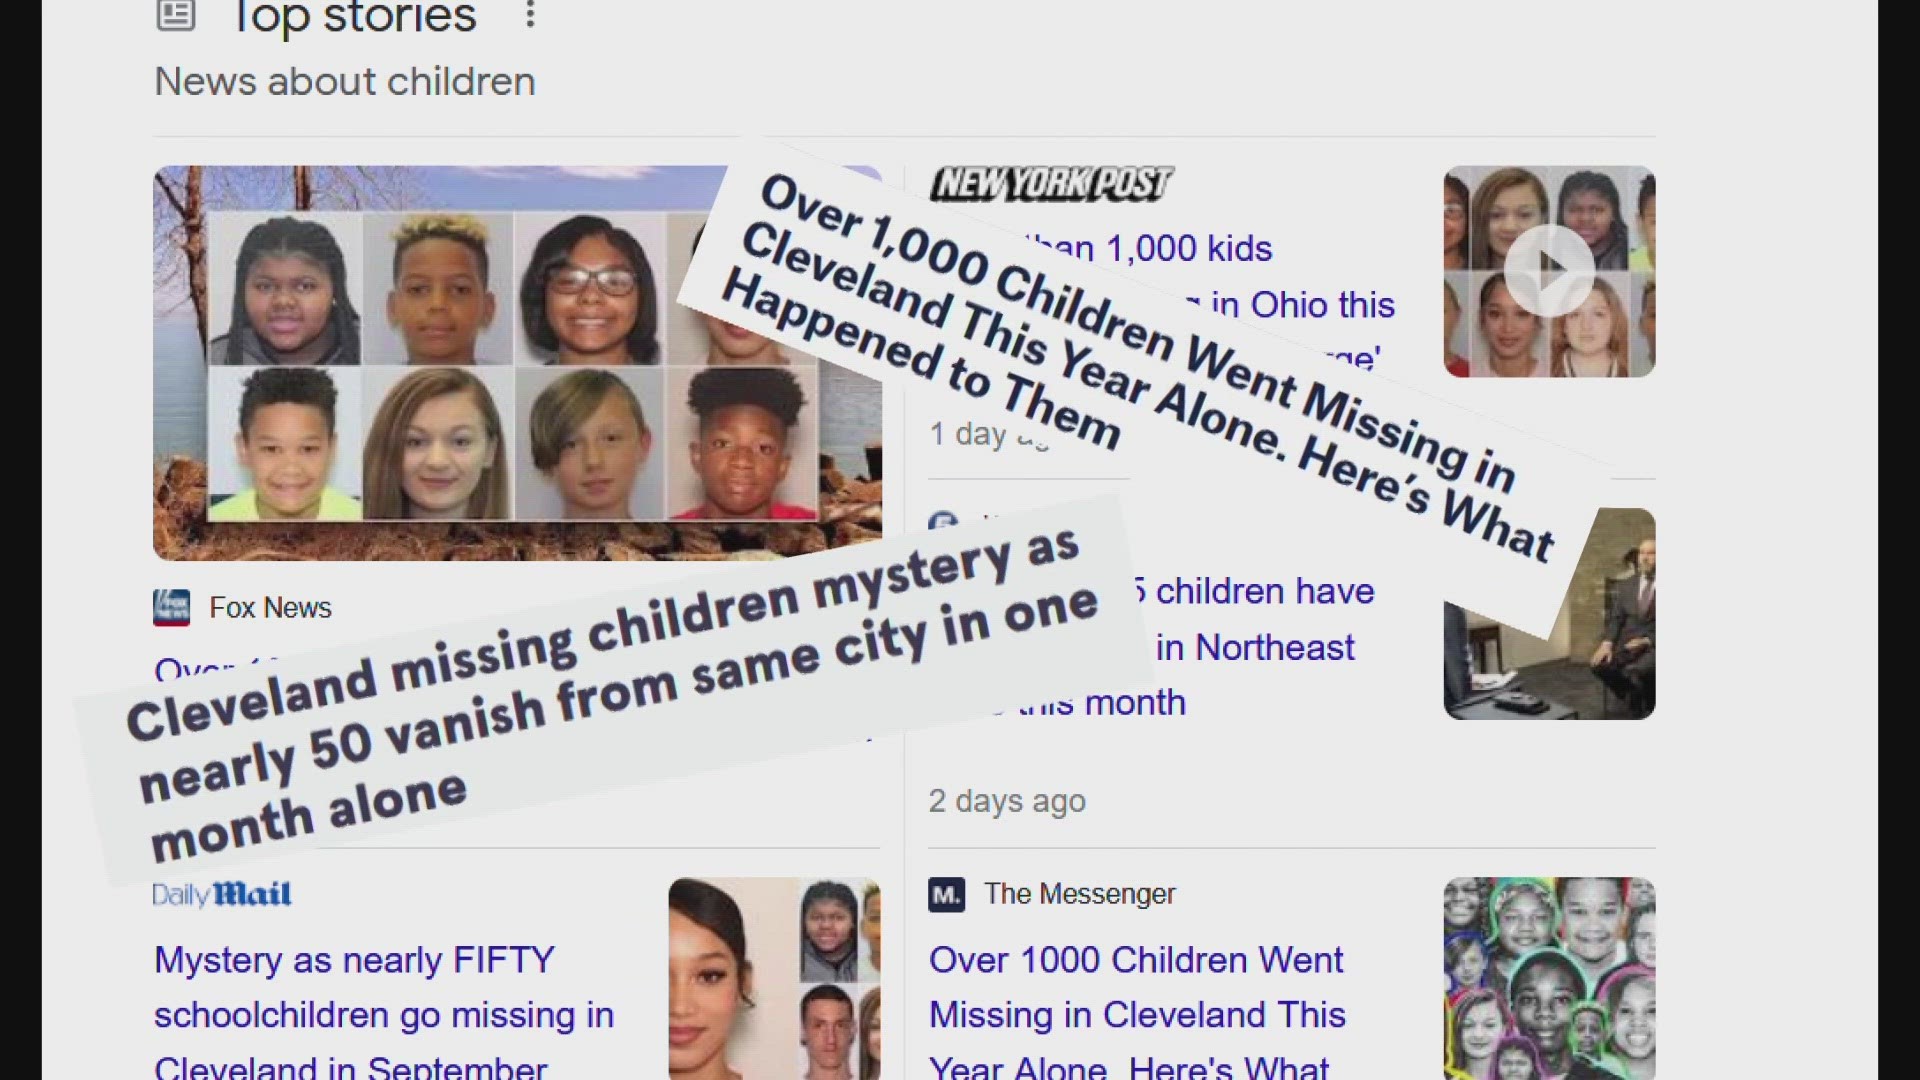 While officials say they are always concerned over missing children, they claim recent headlines about statistics have been 'sensationalized.'